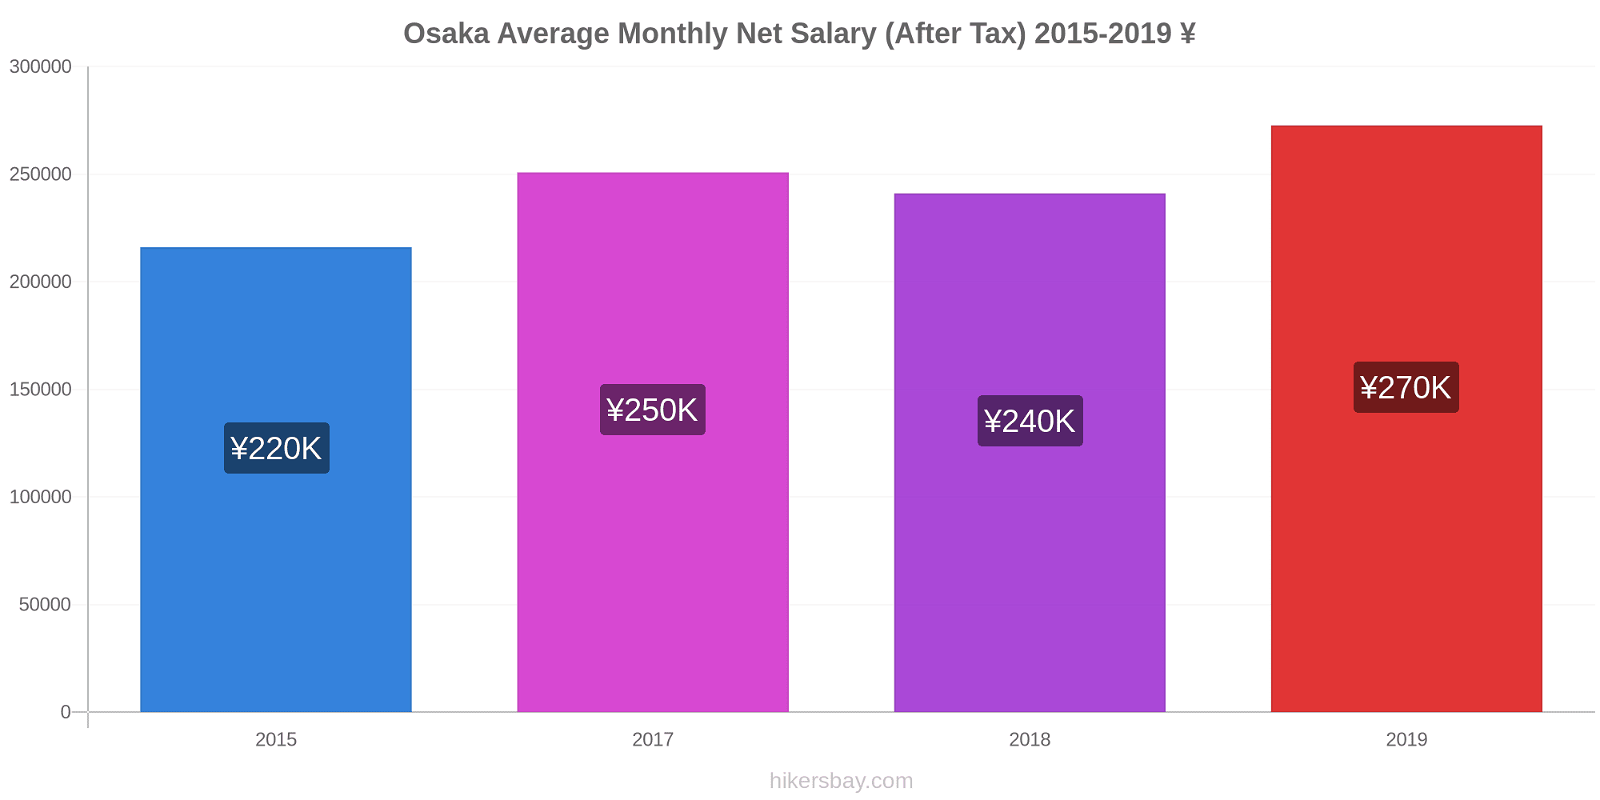 Osaka price changes Average Monthly Net Salary (After Tax) hikersbay.com